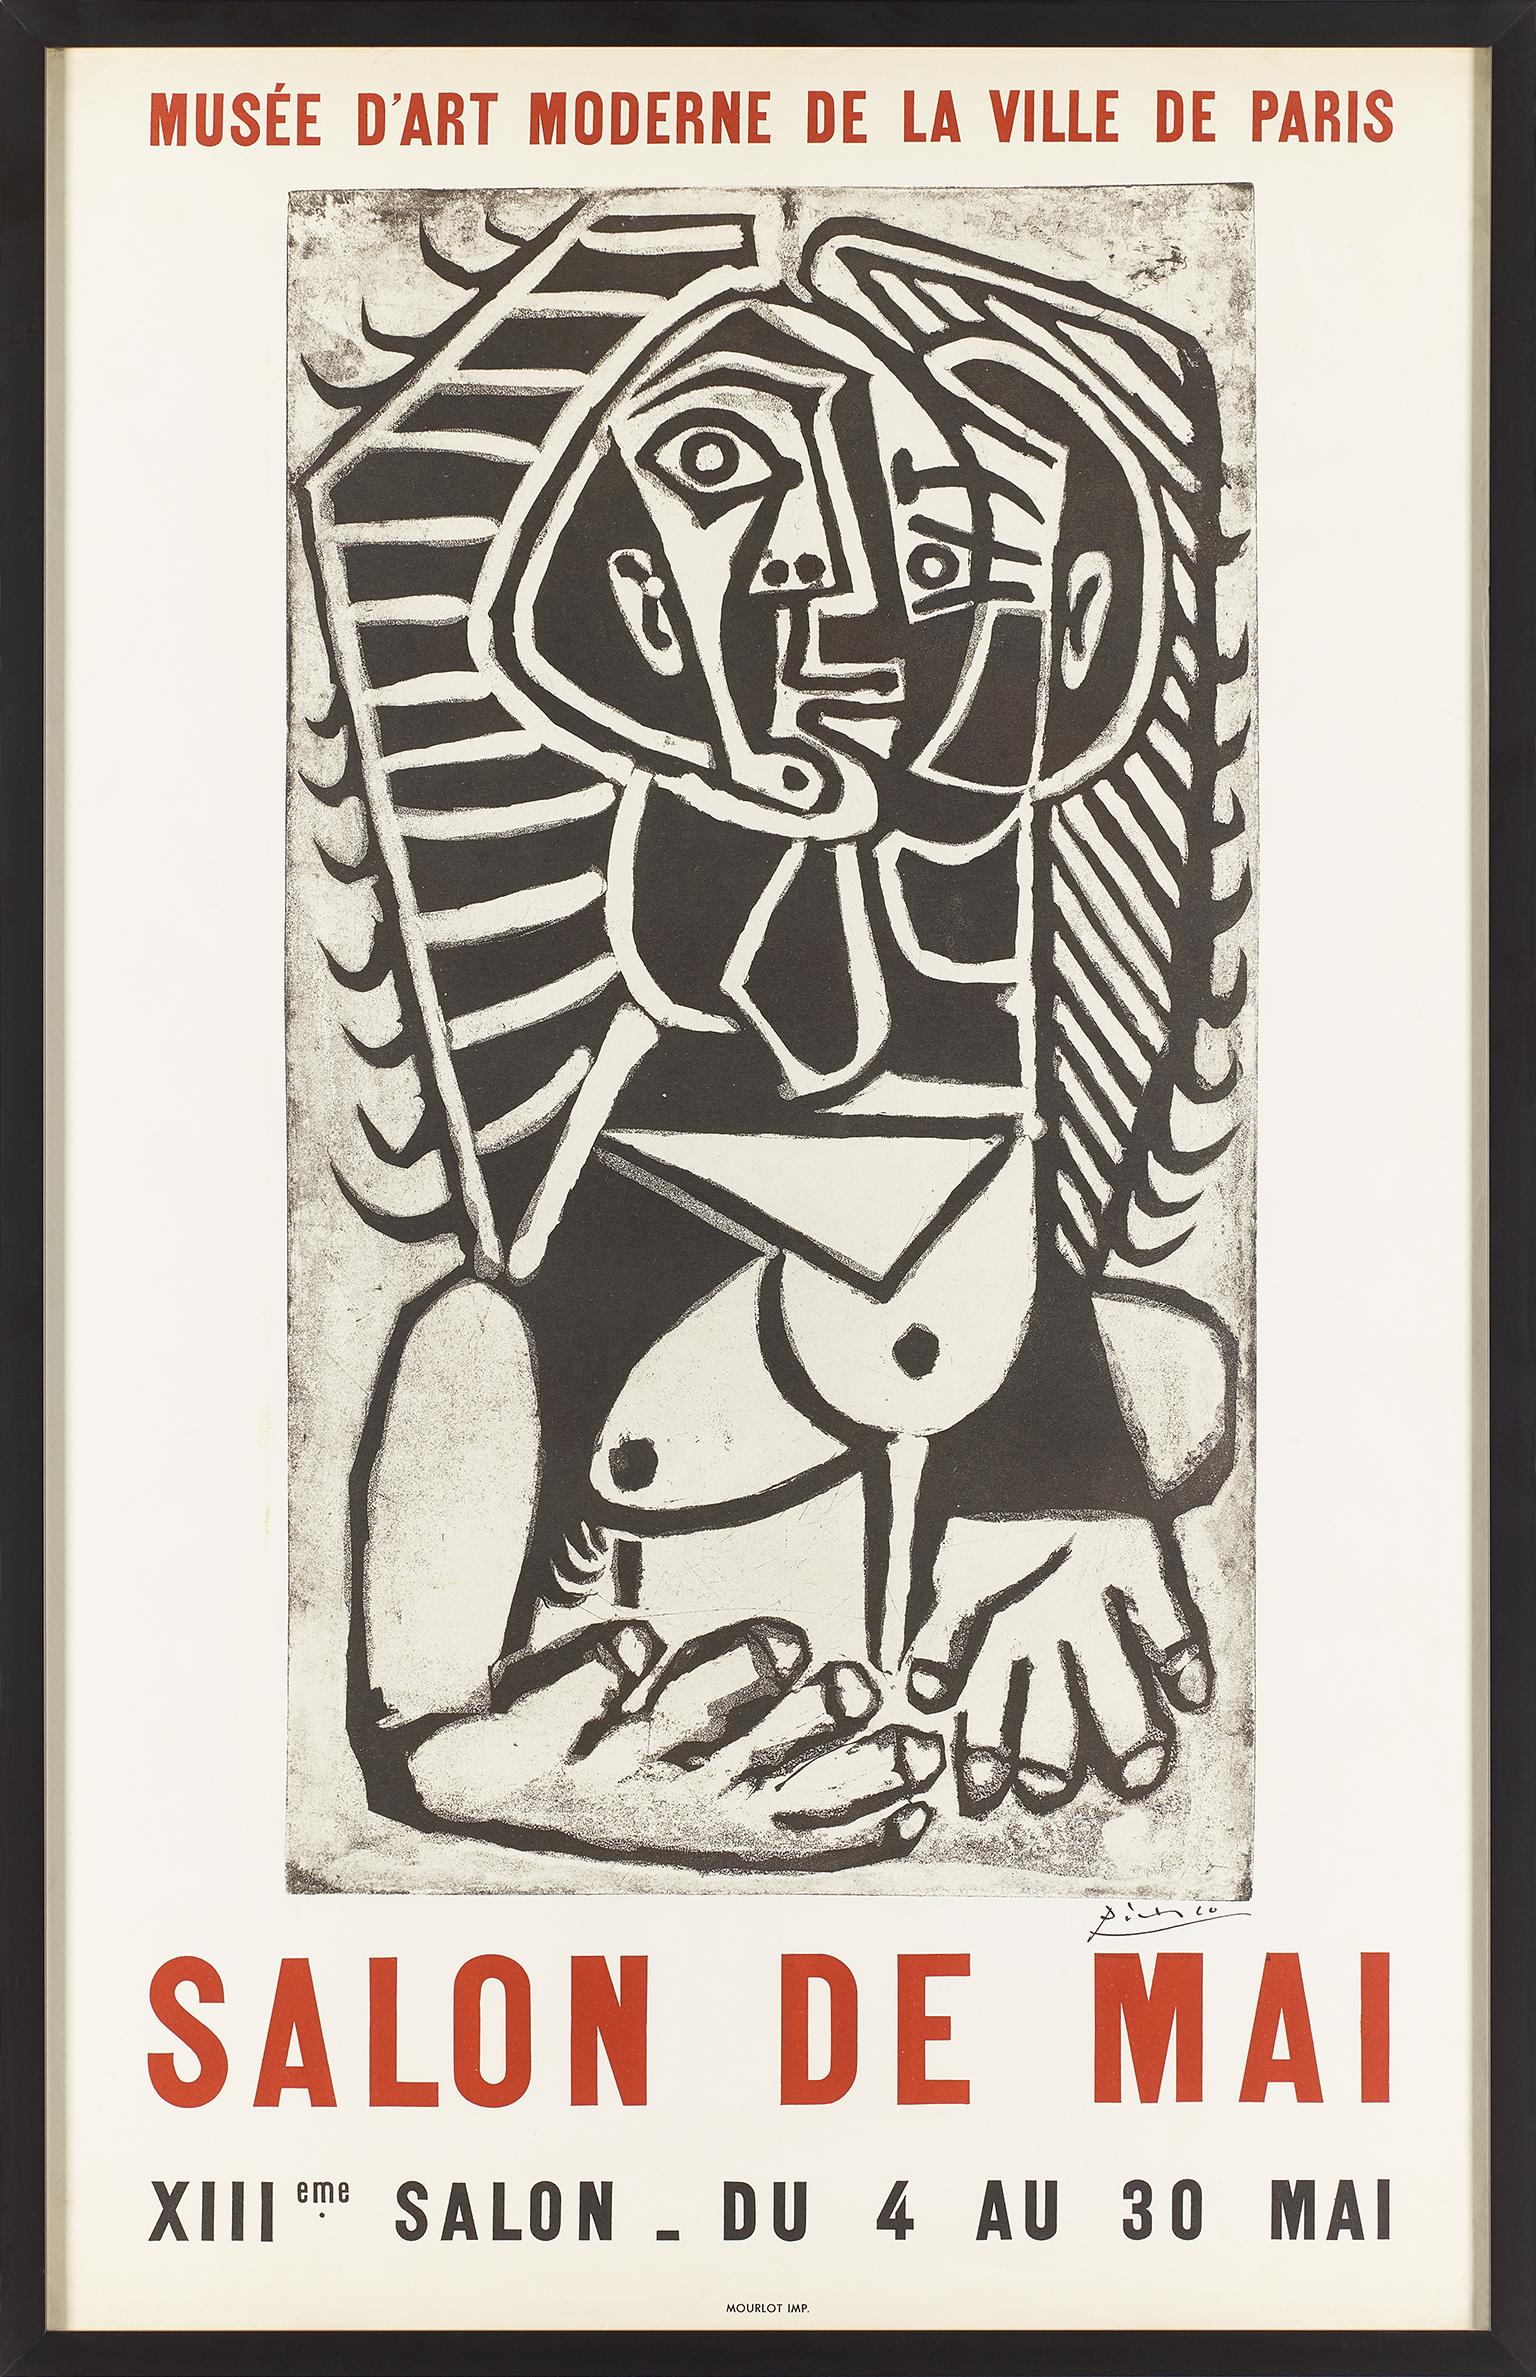 L' égyptienne. - Print by (after) Pablo Picasso